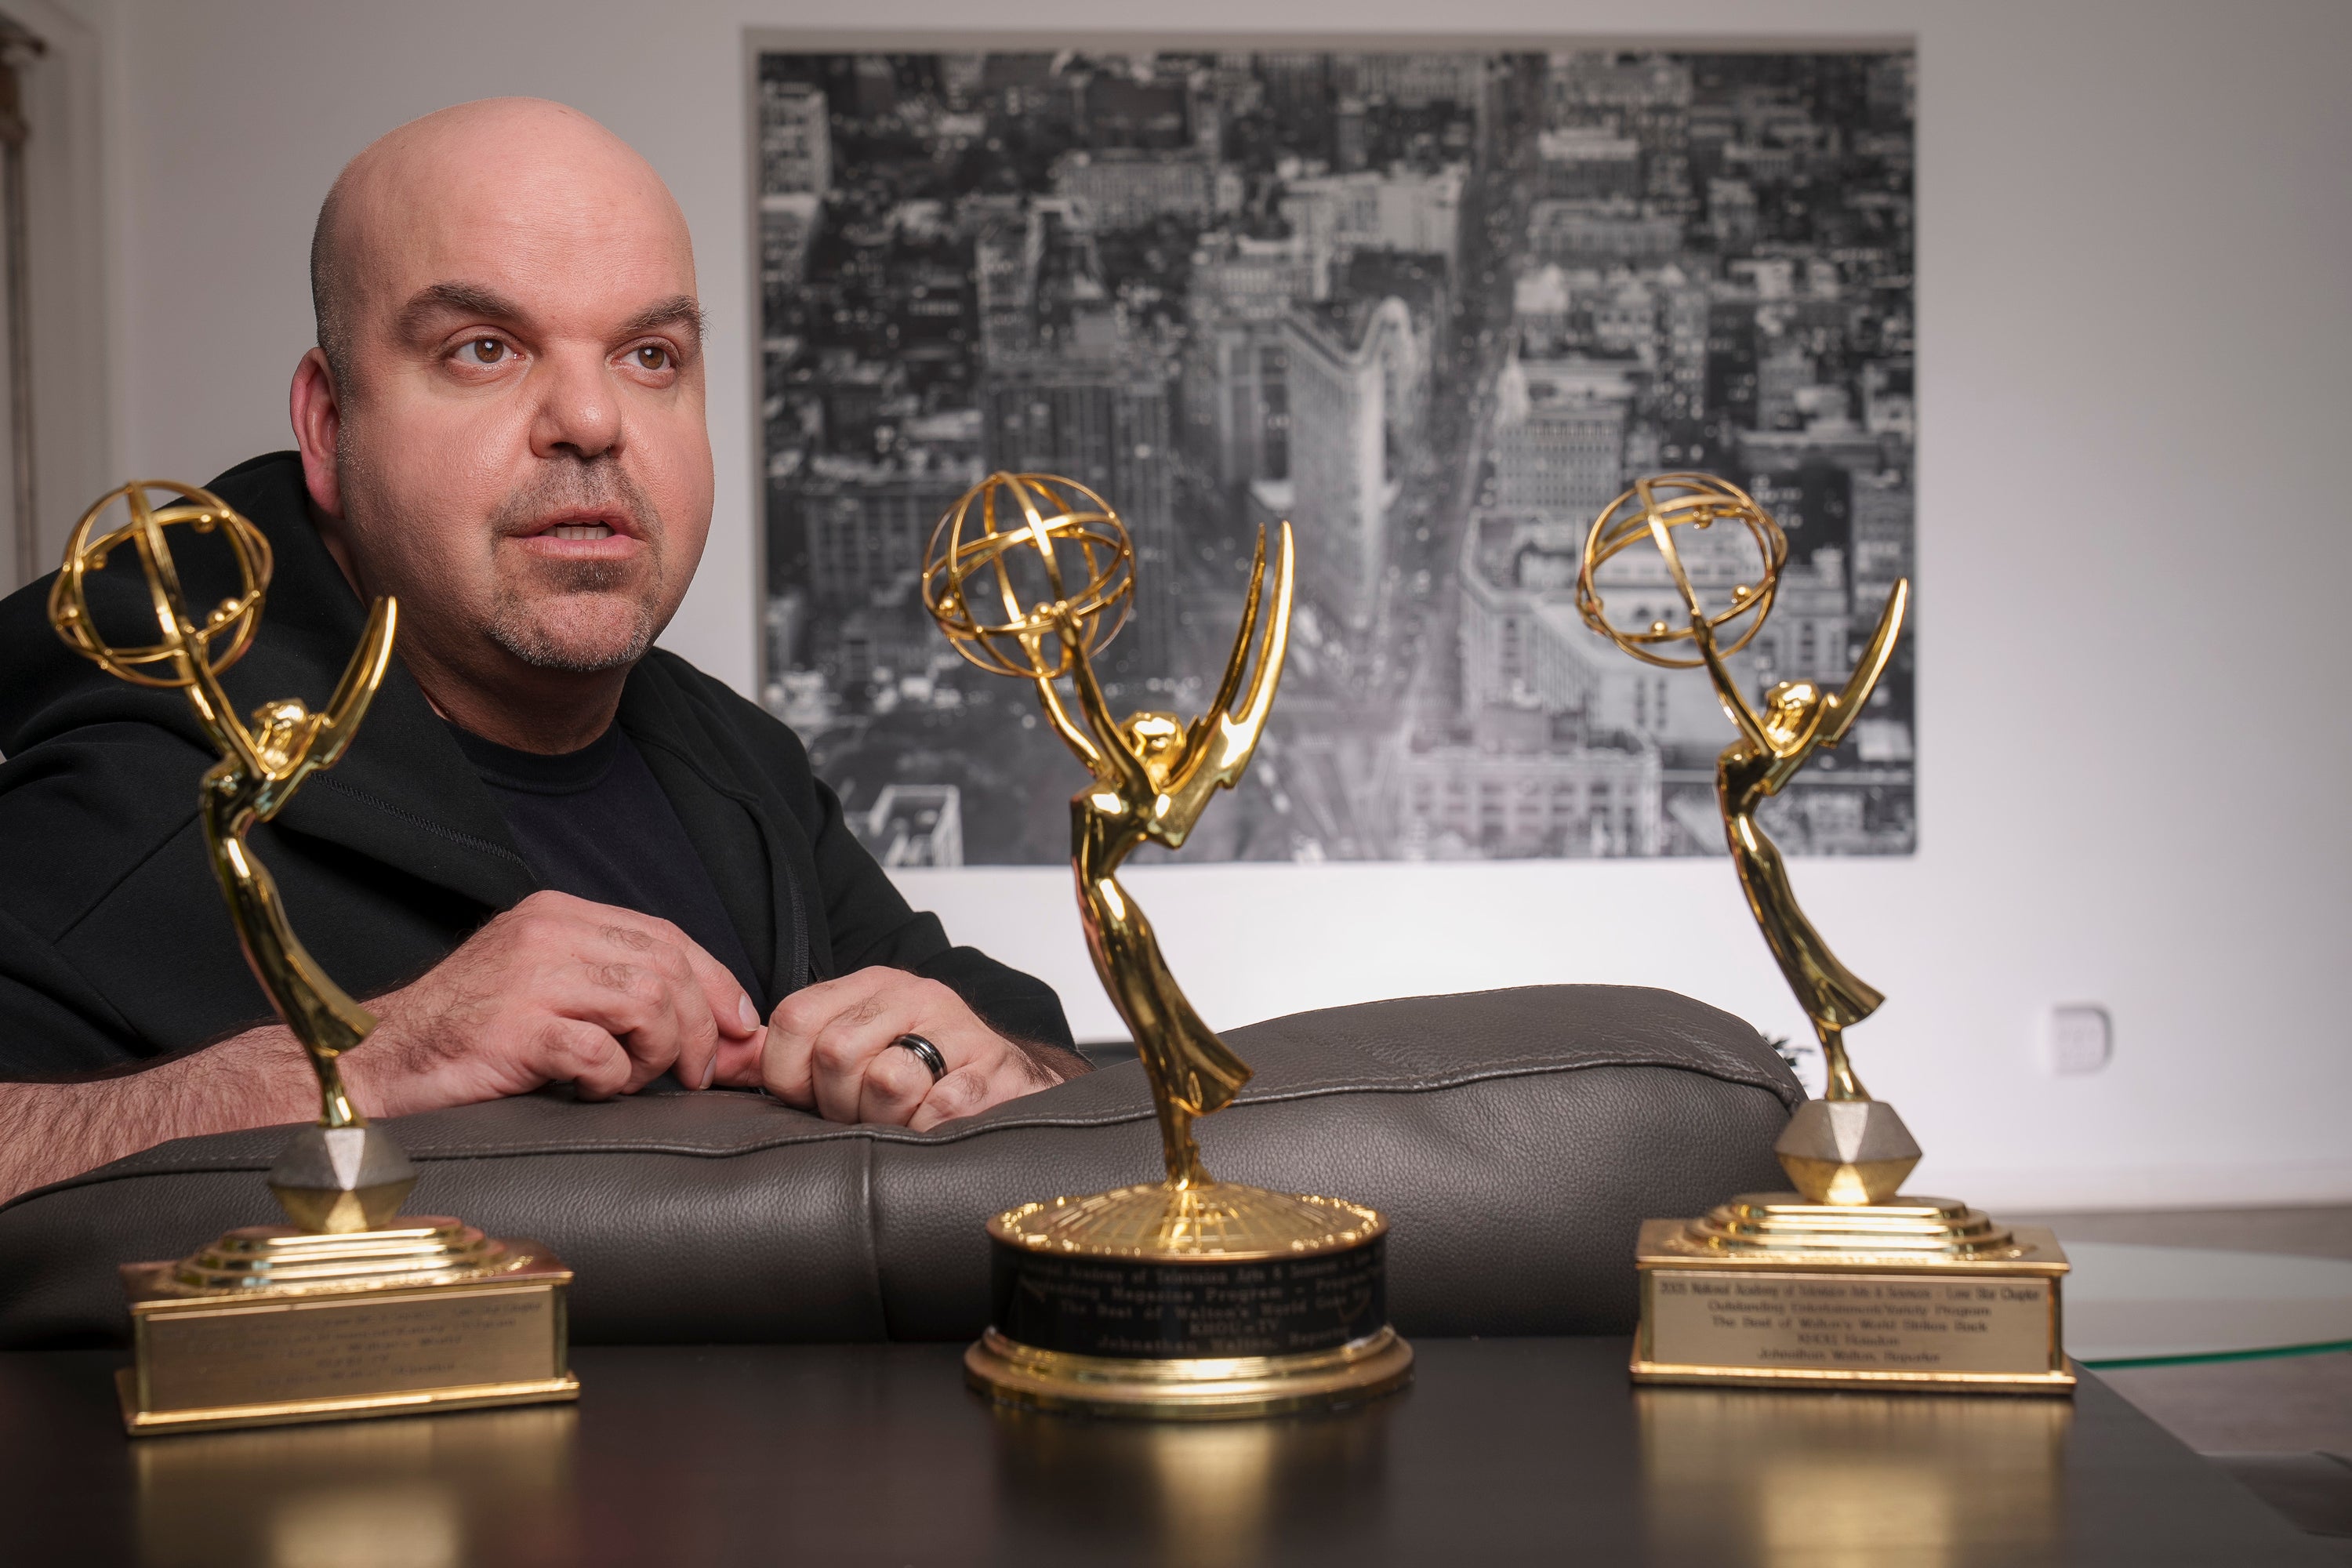 Emmy Award-winning producer Johnathan Walton poses for a photo with his Emmy Awards at his apartment